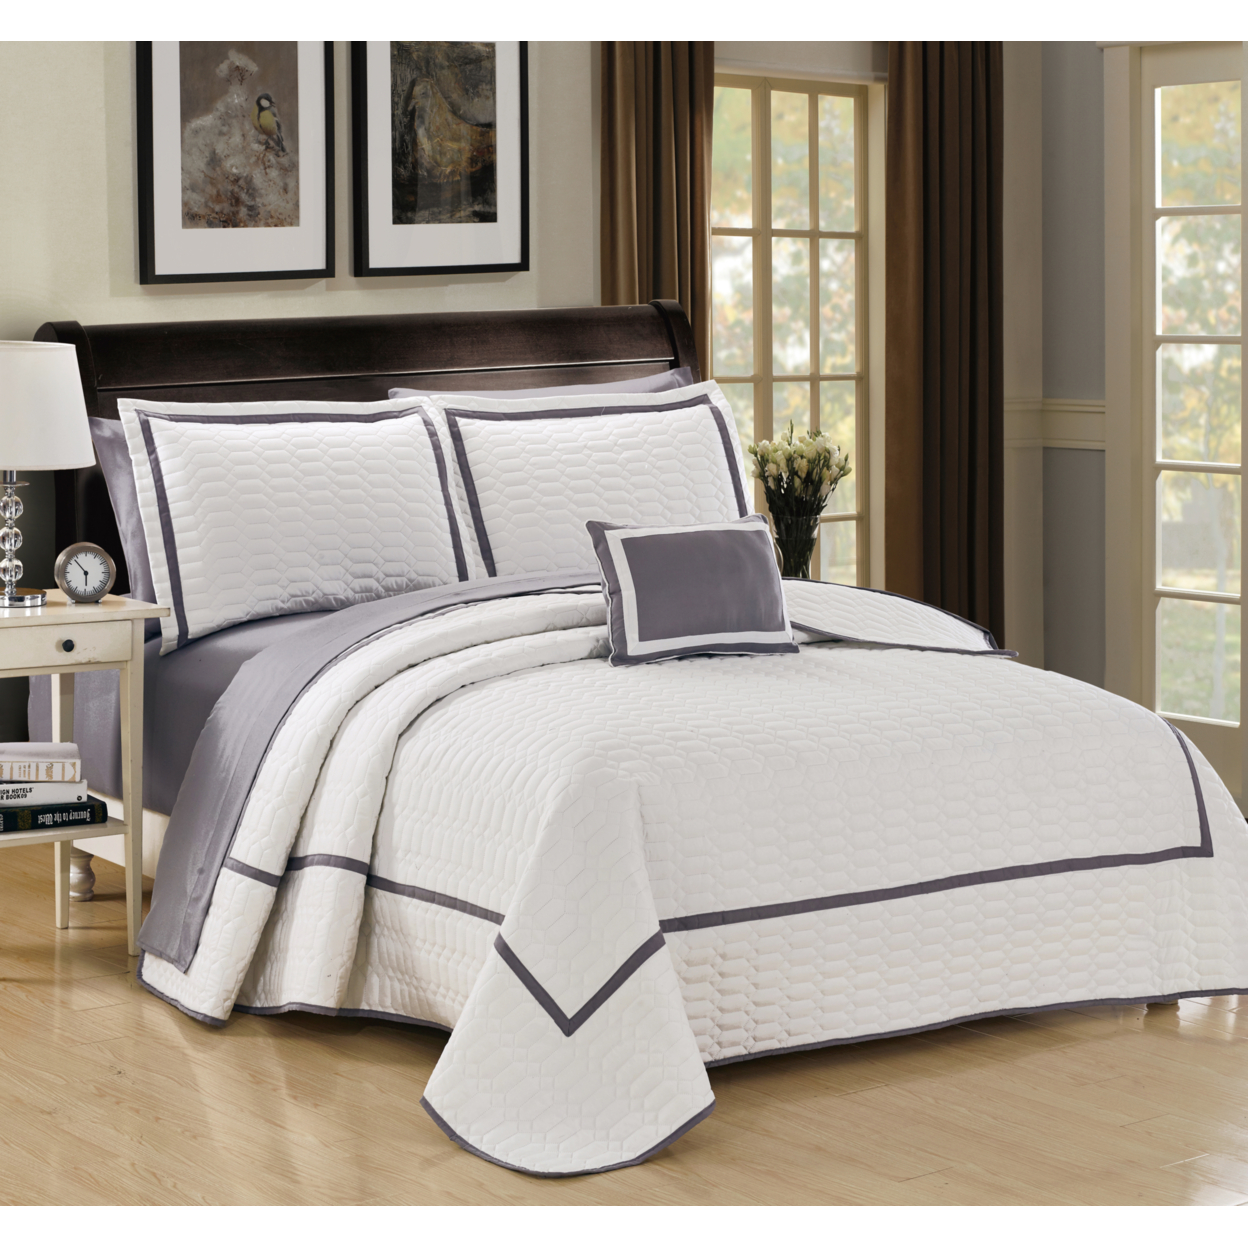 8 Pc. Neal Hotel Collection 2 Tone Banded Geometrical Embroidered, Quilt In A Bag, Includes Sheets Set, Shams & Decorative Pillows - Grey, Q